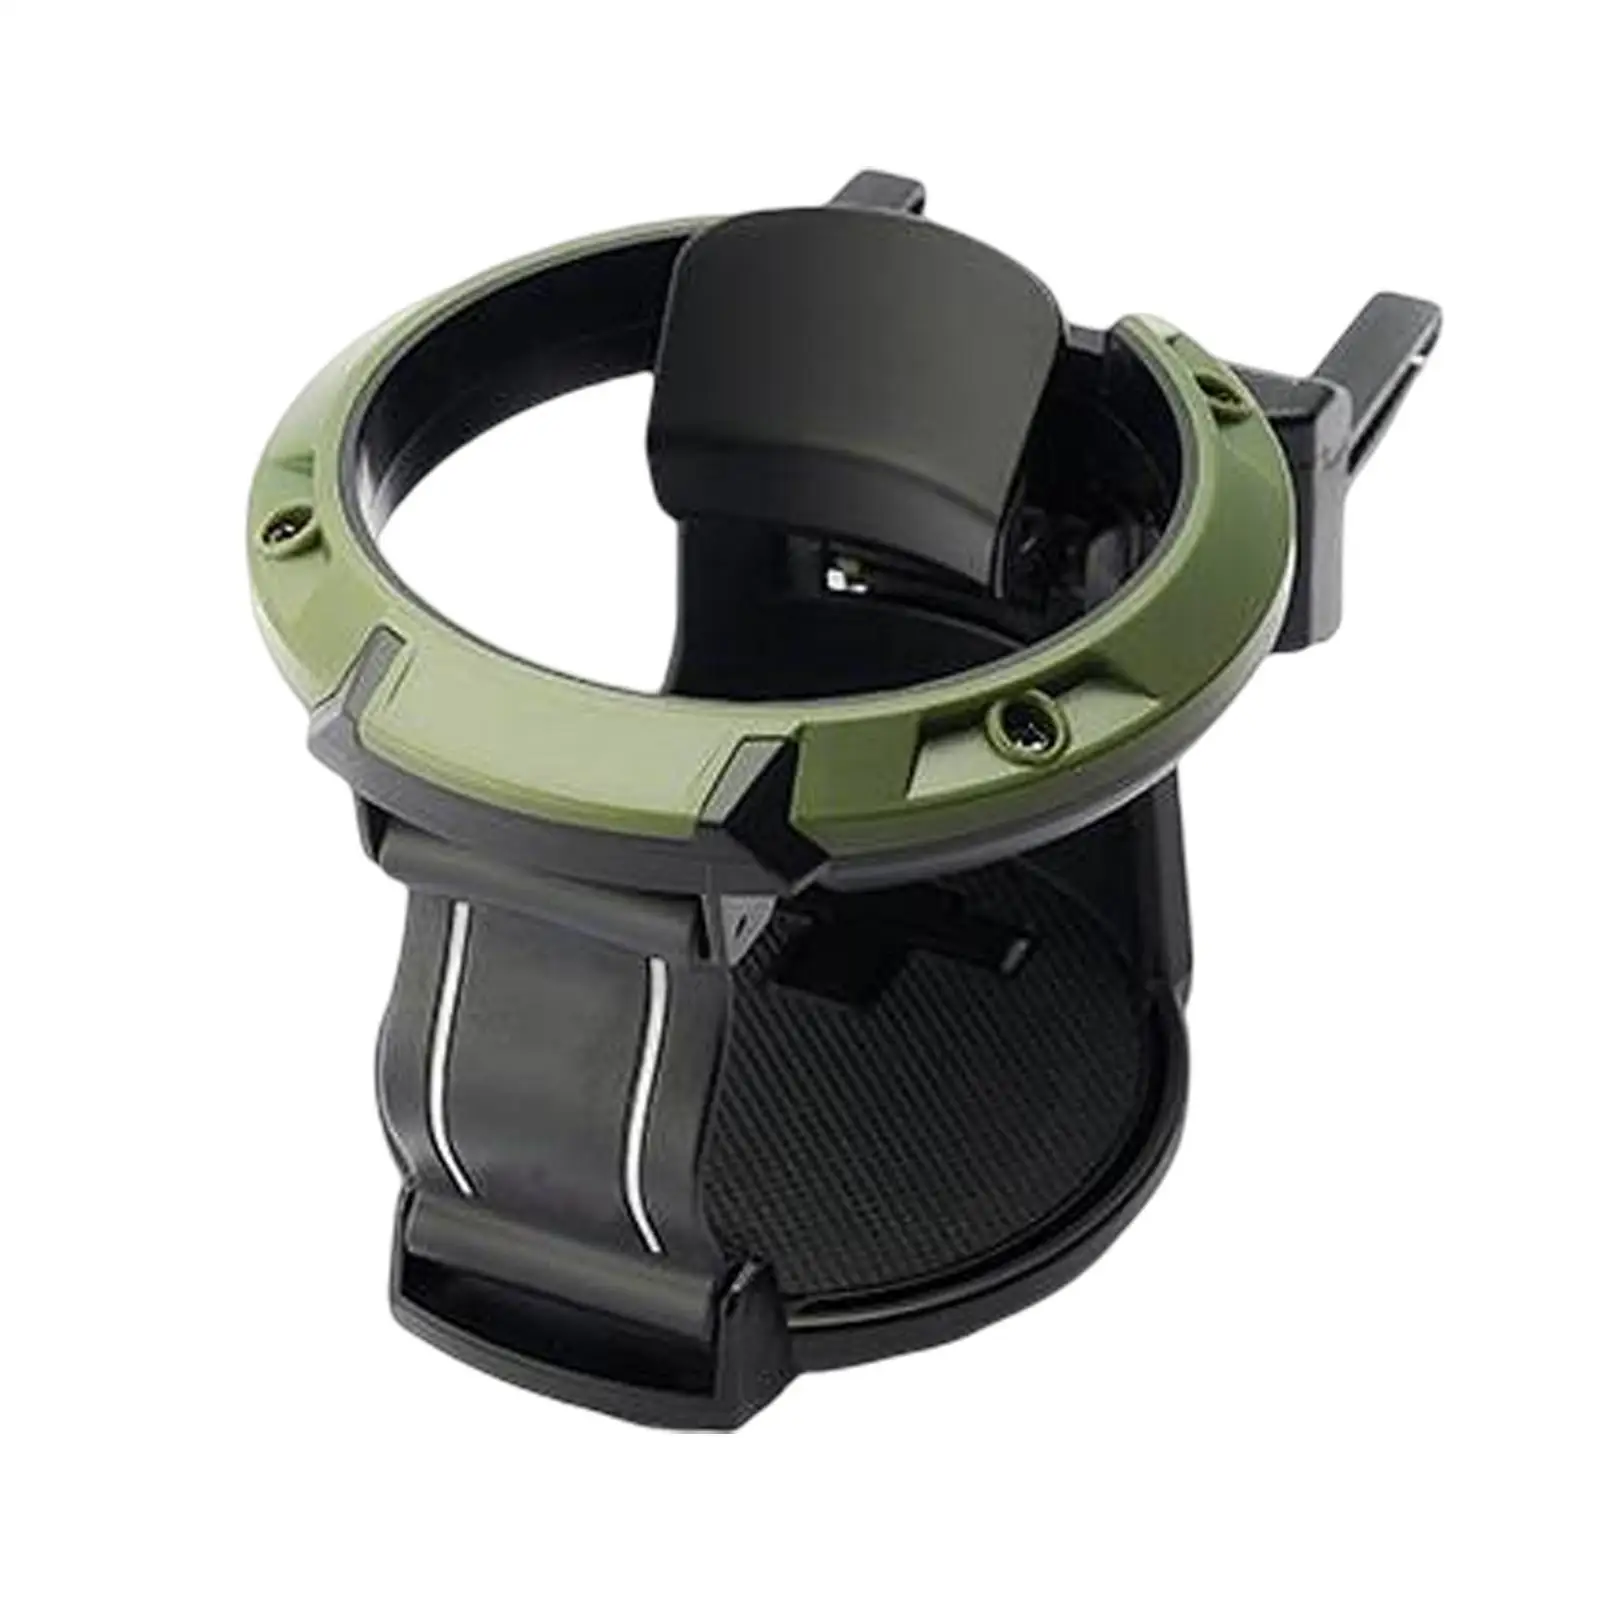 cup Holder with Additional Hook for Automobile Truck Accessories